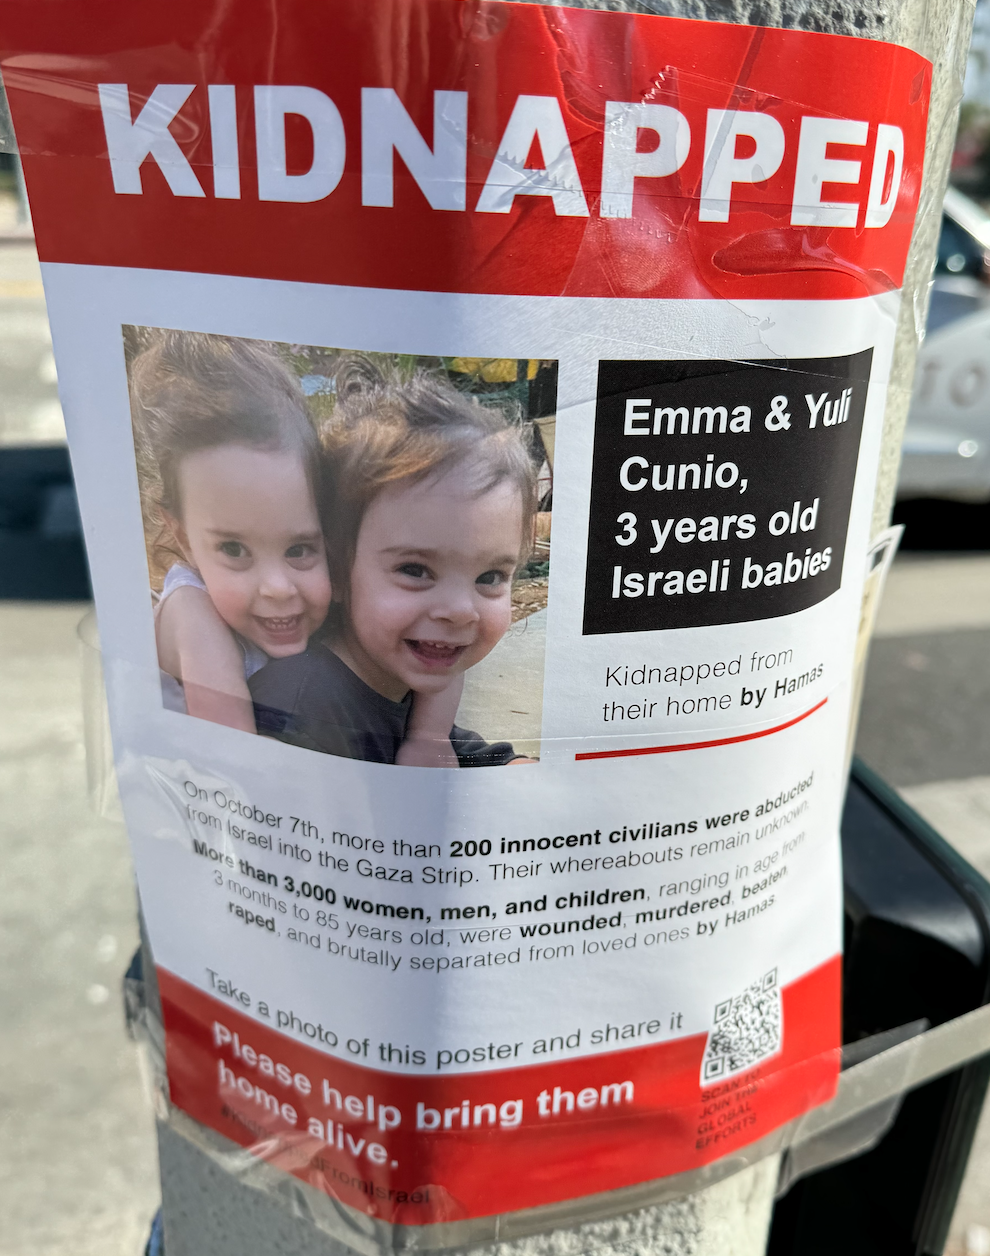 Jewish babies kidnapped by Hamas poster